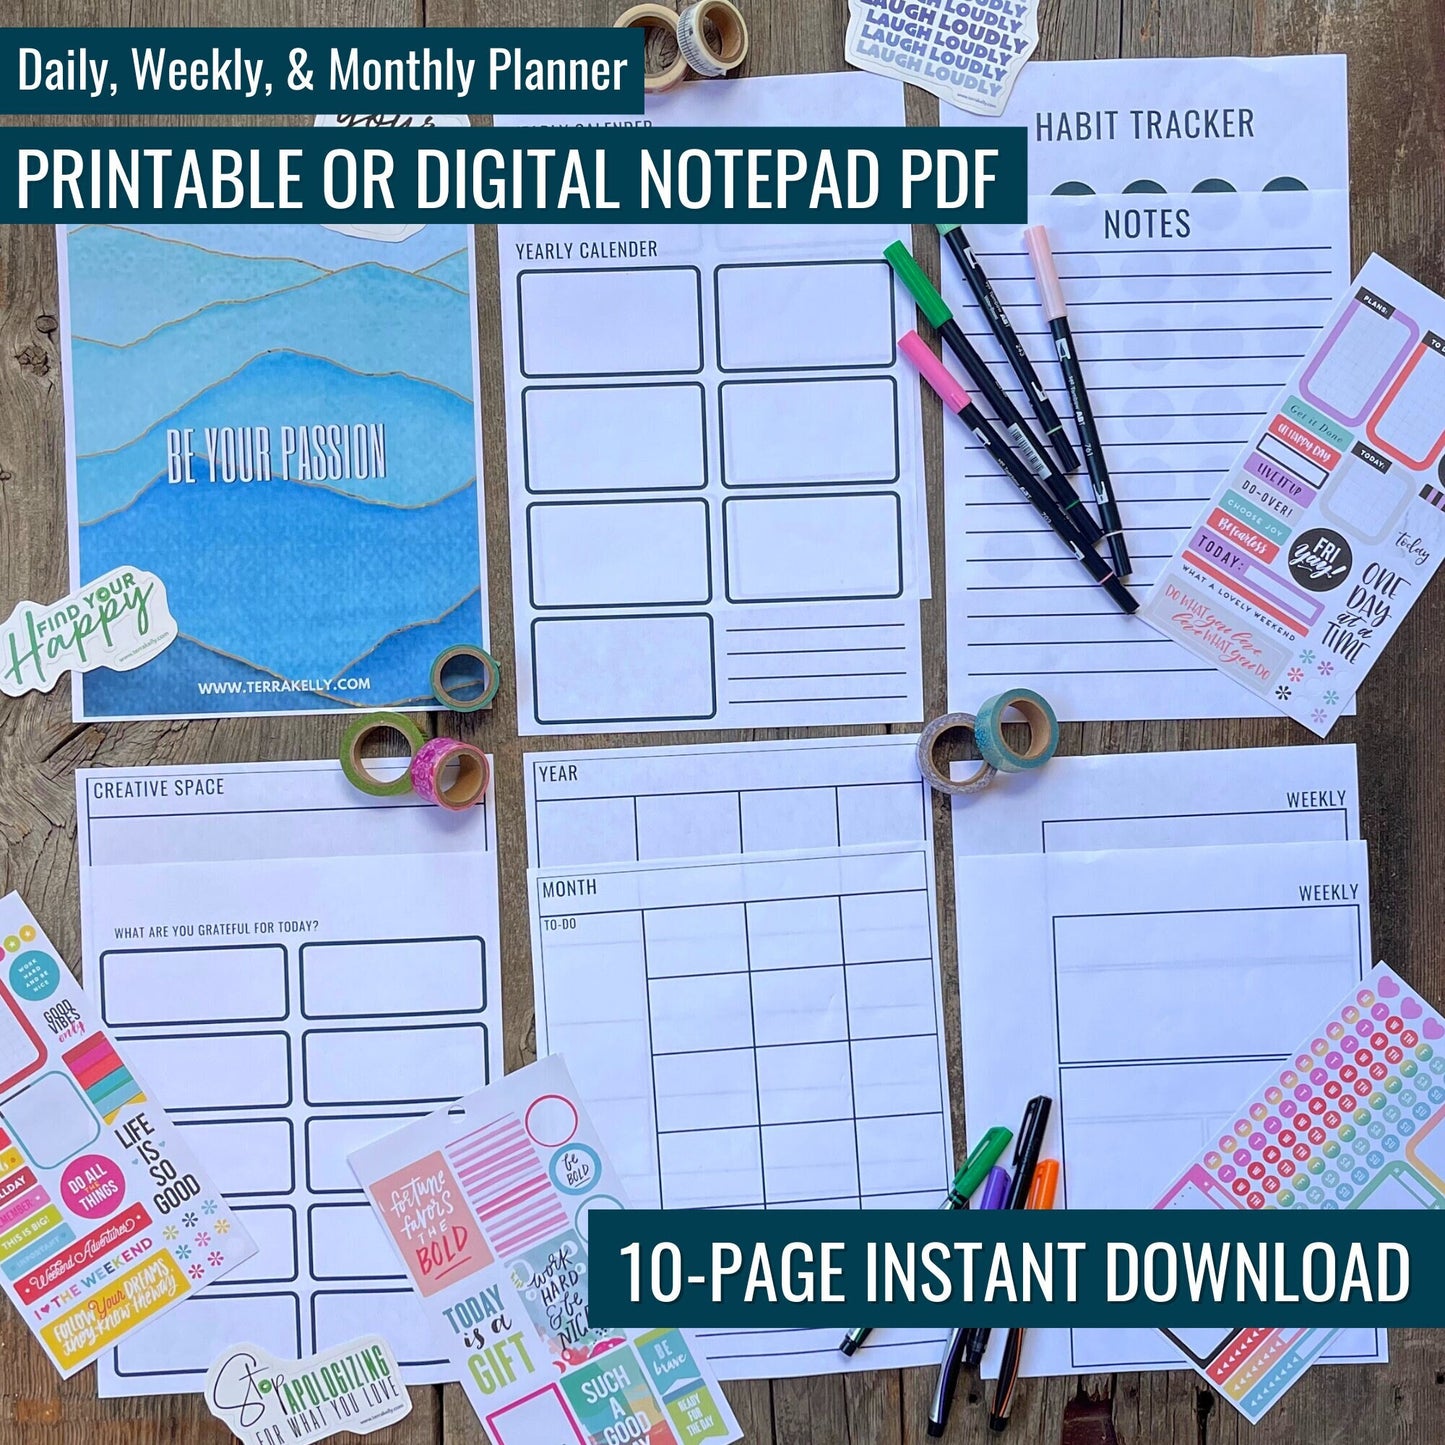 Printable Digital Personal Planner | Daily, Weekly, & Monthly Downloads | Instant Download | A4, A5, 5.5 x 8.5, and 8.5 x 11 Sizes